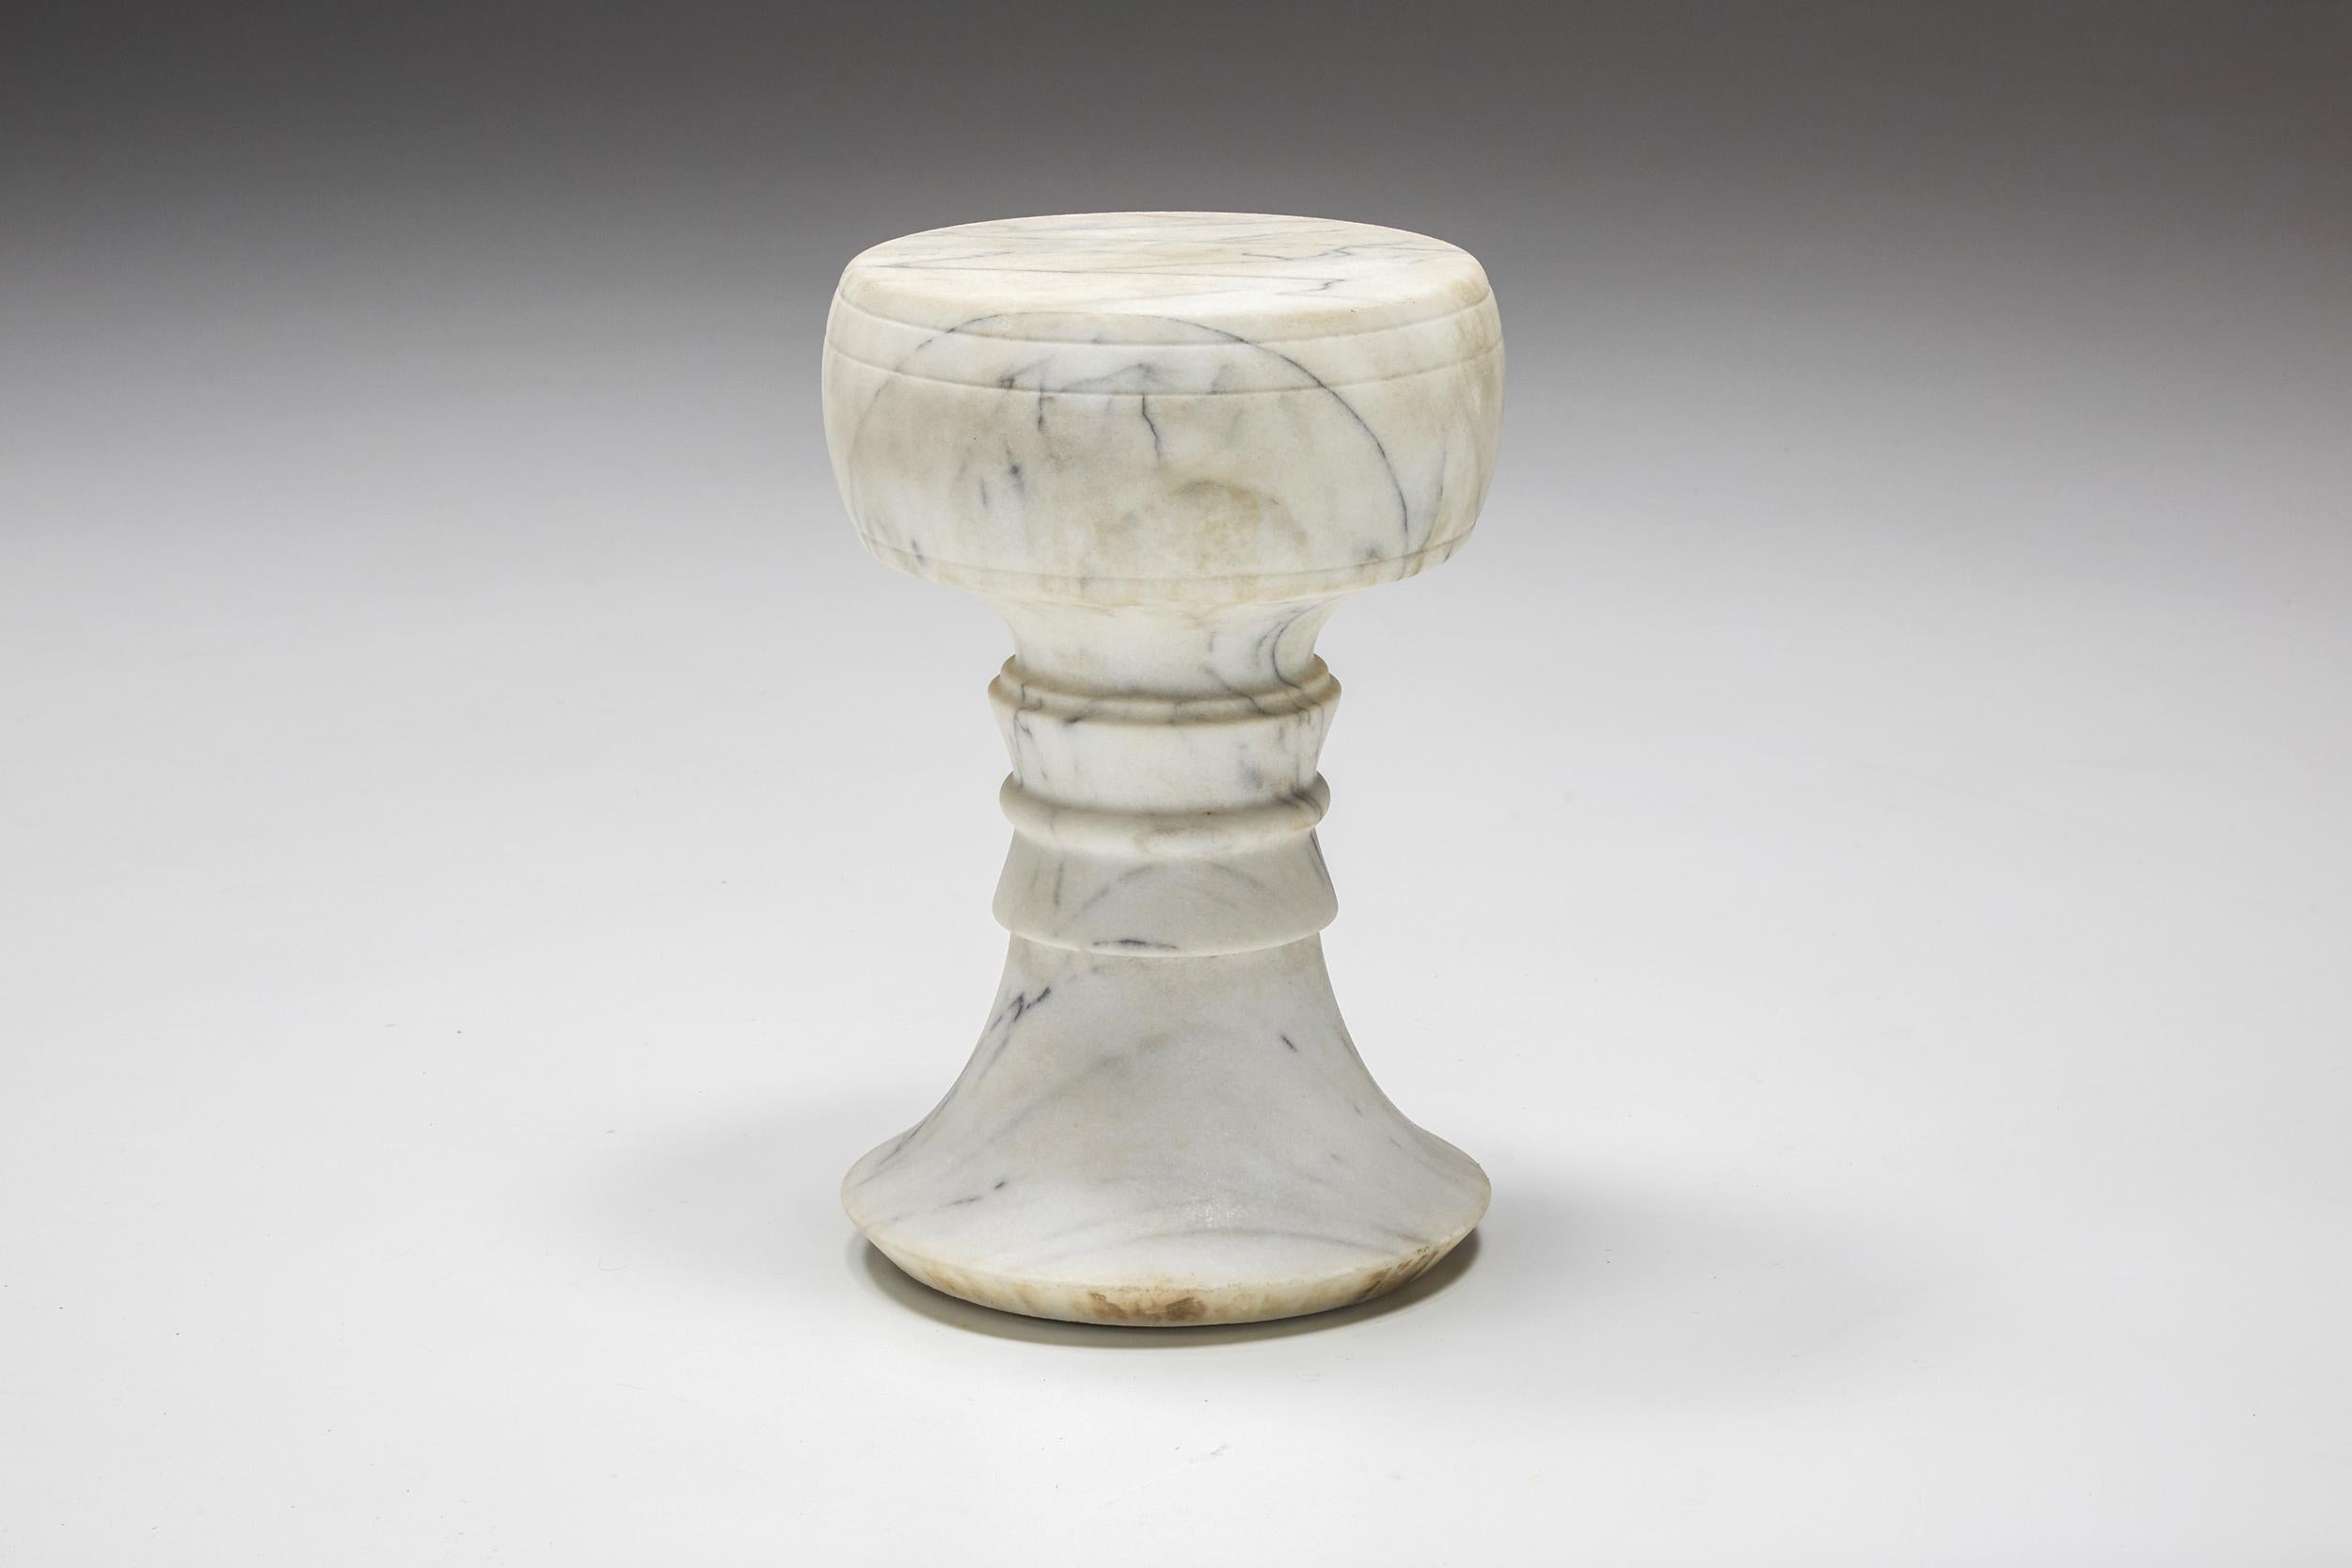 Mangiarotti style; Carrara Marble; Dining Stools; Garden Chairs; Italian Craft, 1950's; Garden Furniture; Garden Set; 

Unique Carrara marble garden stool, only one more piece available. This elegant stool adds value to a more rustic-looking garden.